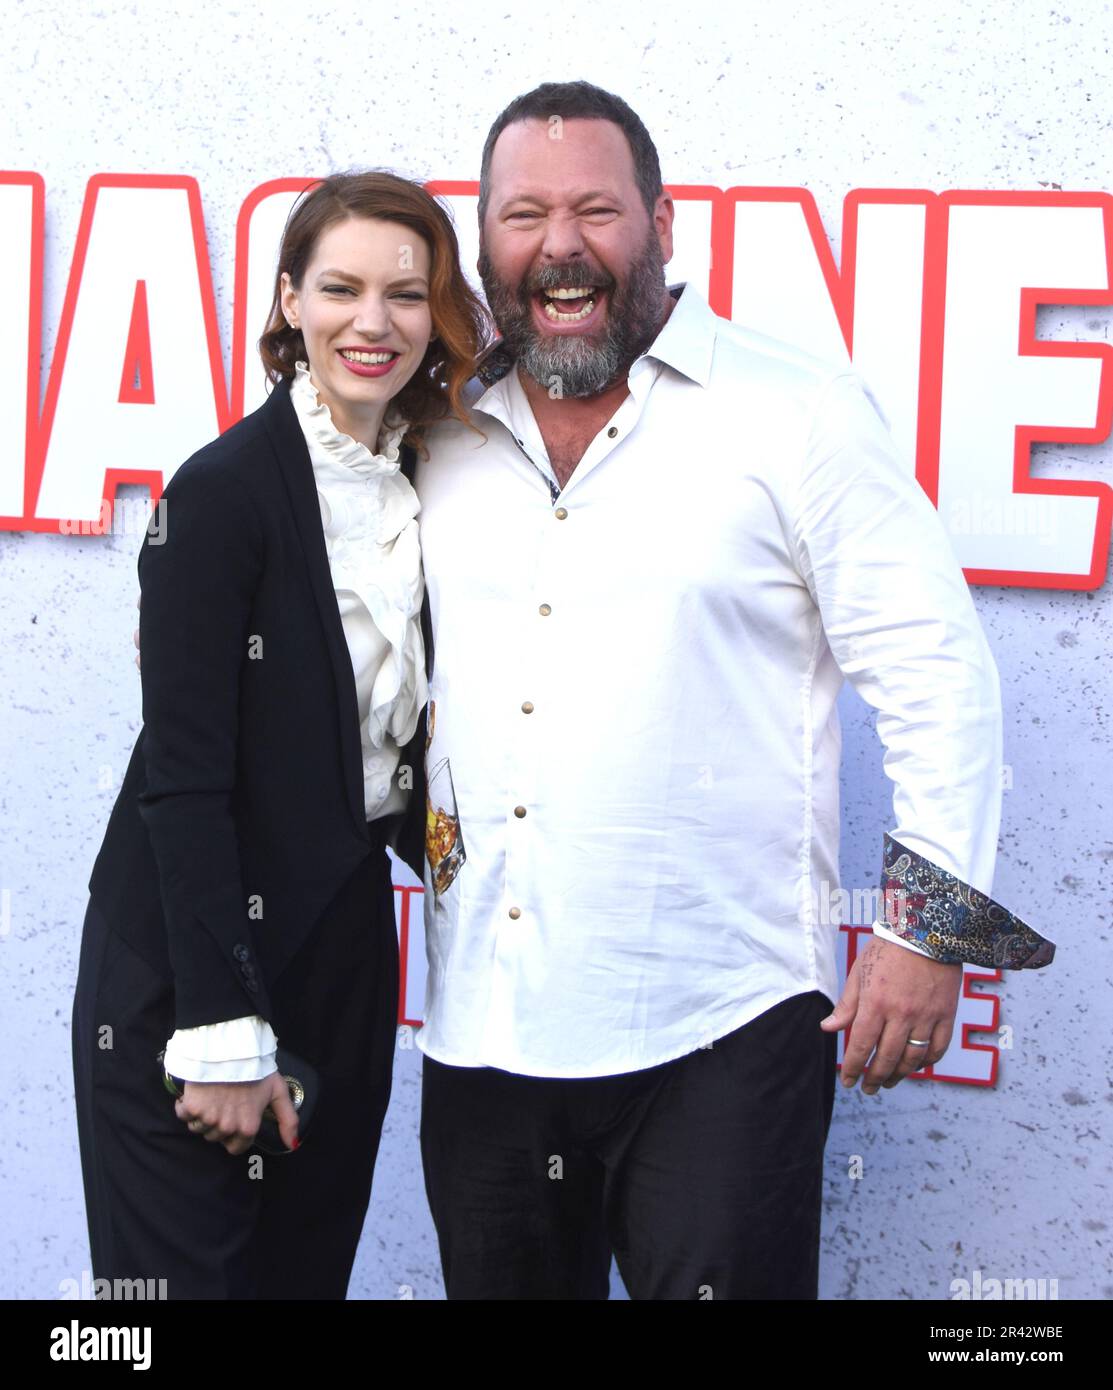 Los Angeles, California. 25th May 2023 Actress Iva Babic and Comedian/Actor Bert Kreischer attend the Los Angeles Premiere of Sony Pictures' 'The Machine' at Regency Village Theatre on May 25, 2023 in Los Angeles, California. , USA. Photo by Barry King/Alamy Live News Stock Photo